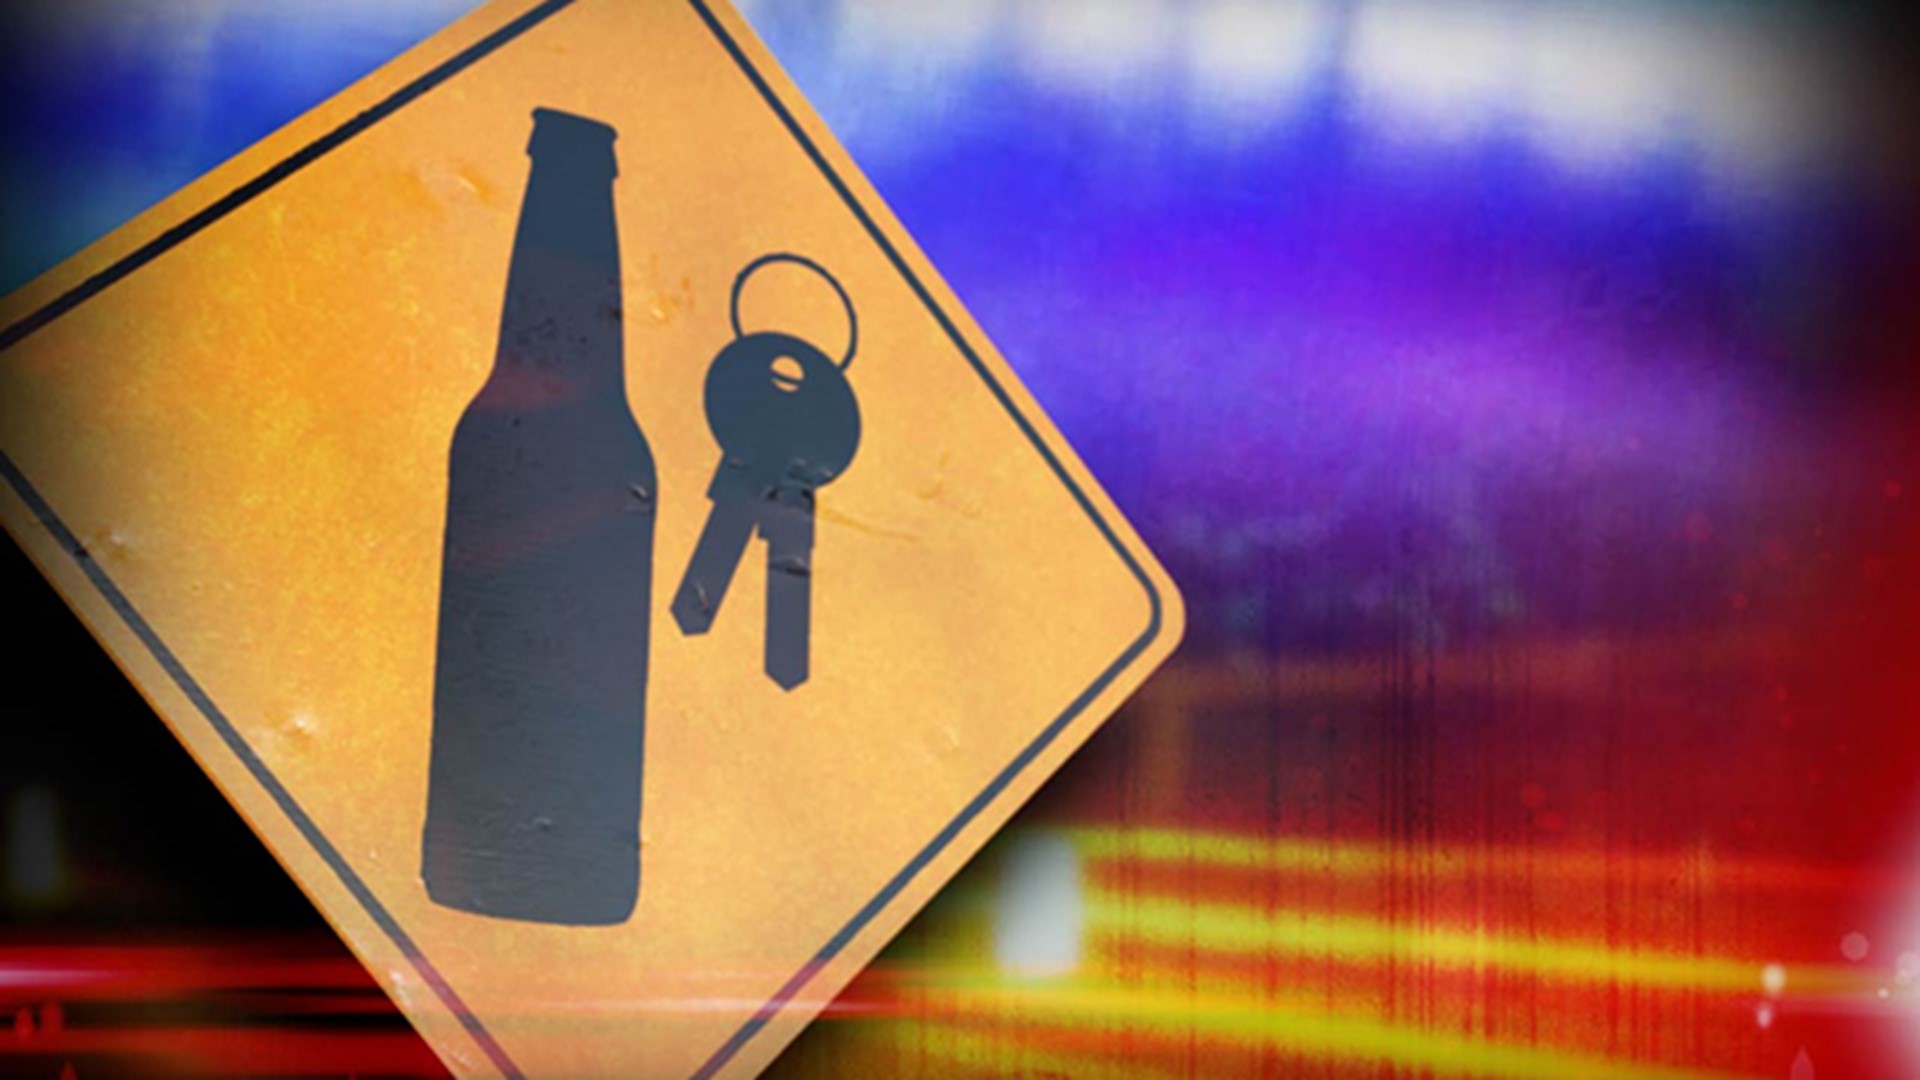 If you're going to drink, don't drive. Huntsville Police will have checkpoints throughout the city at "traffic hotspots".